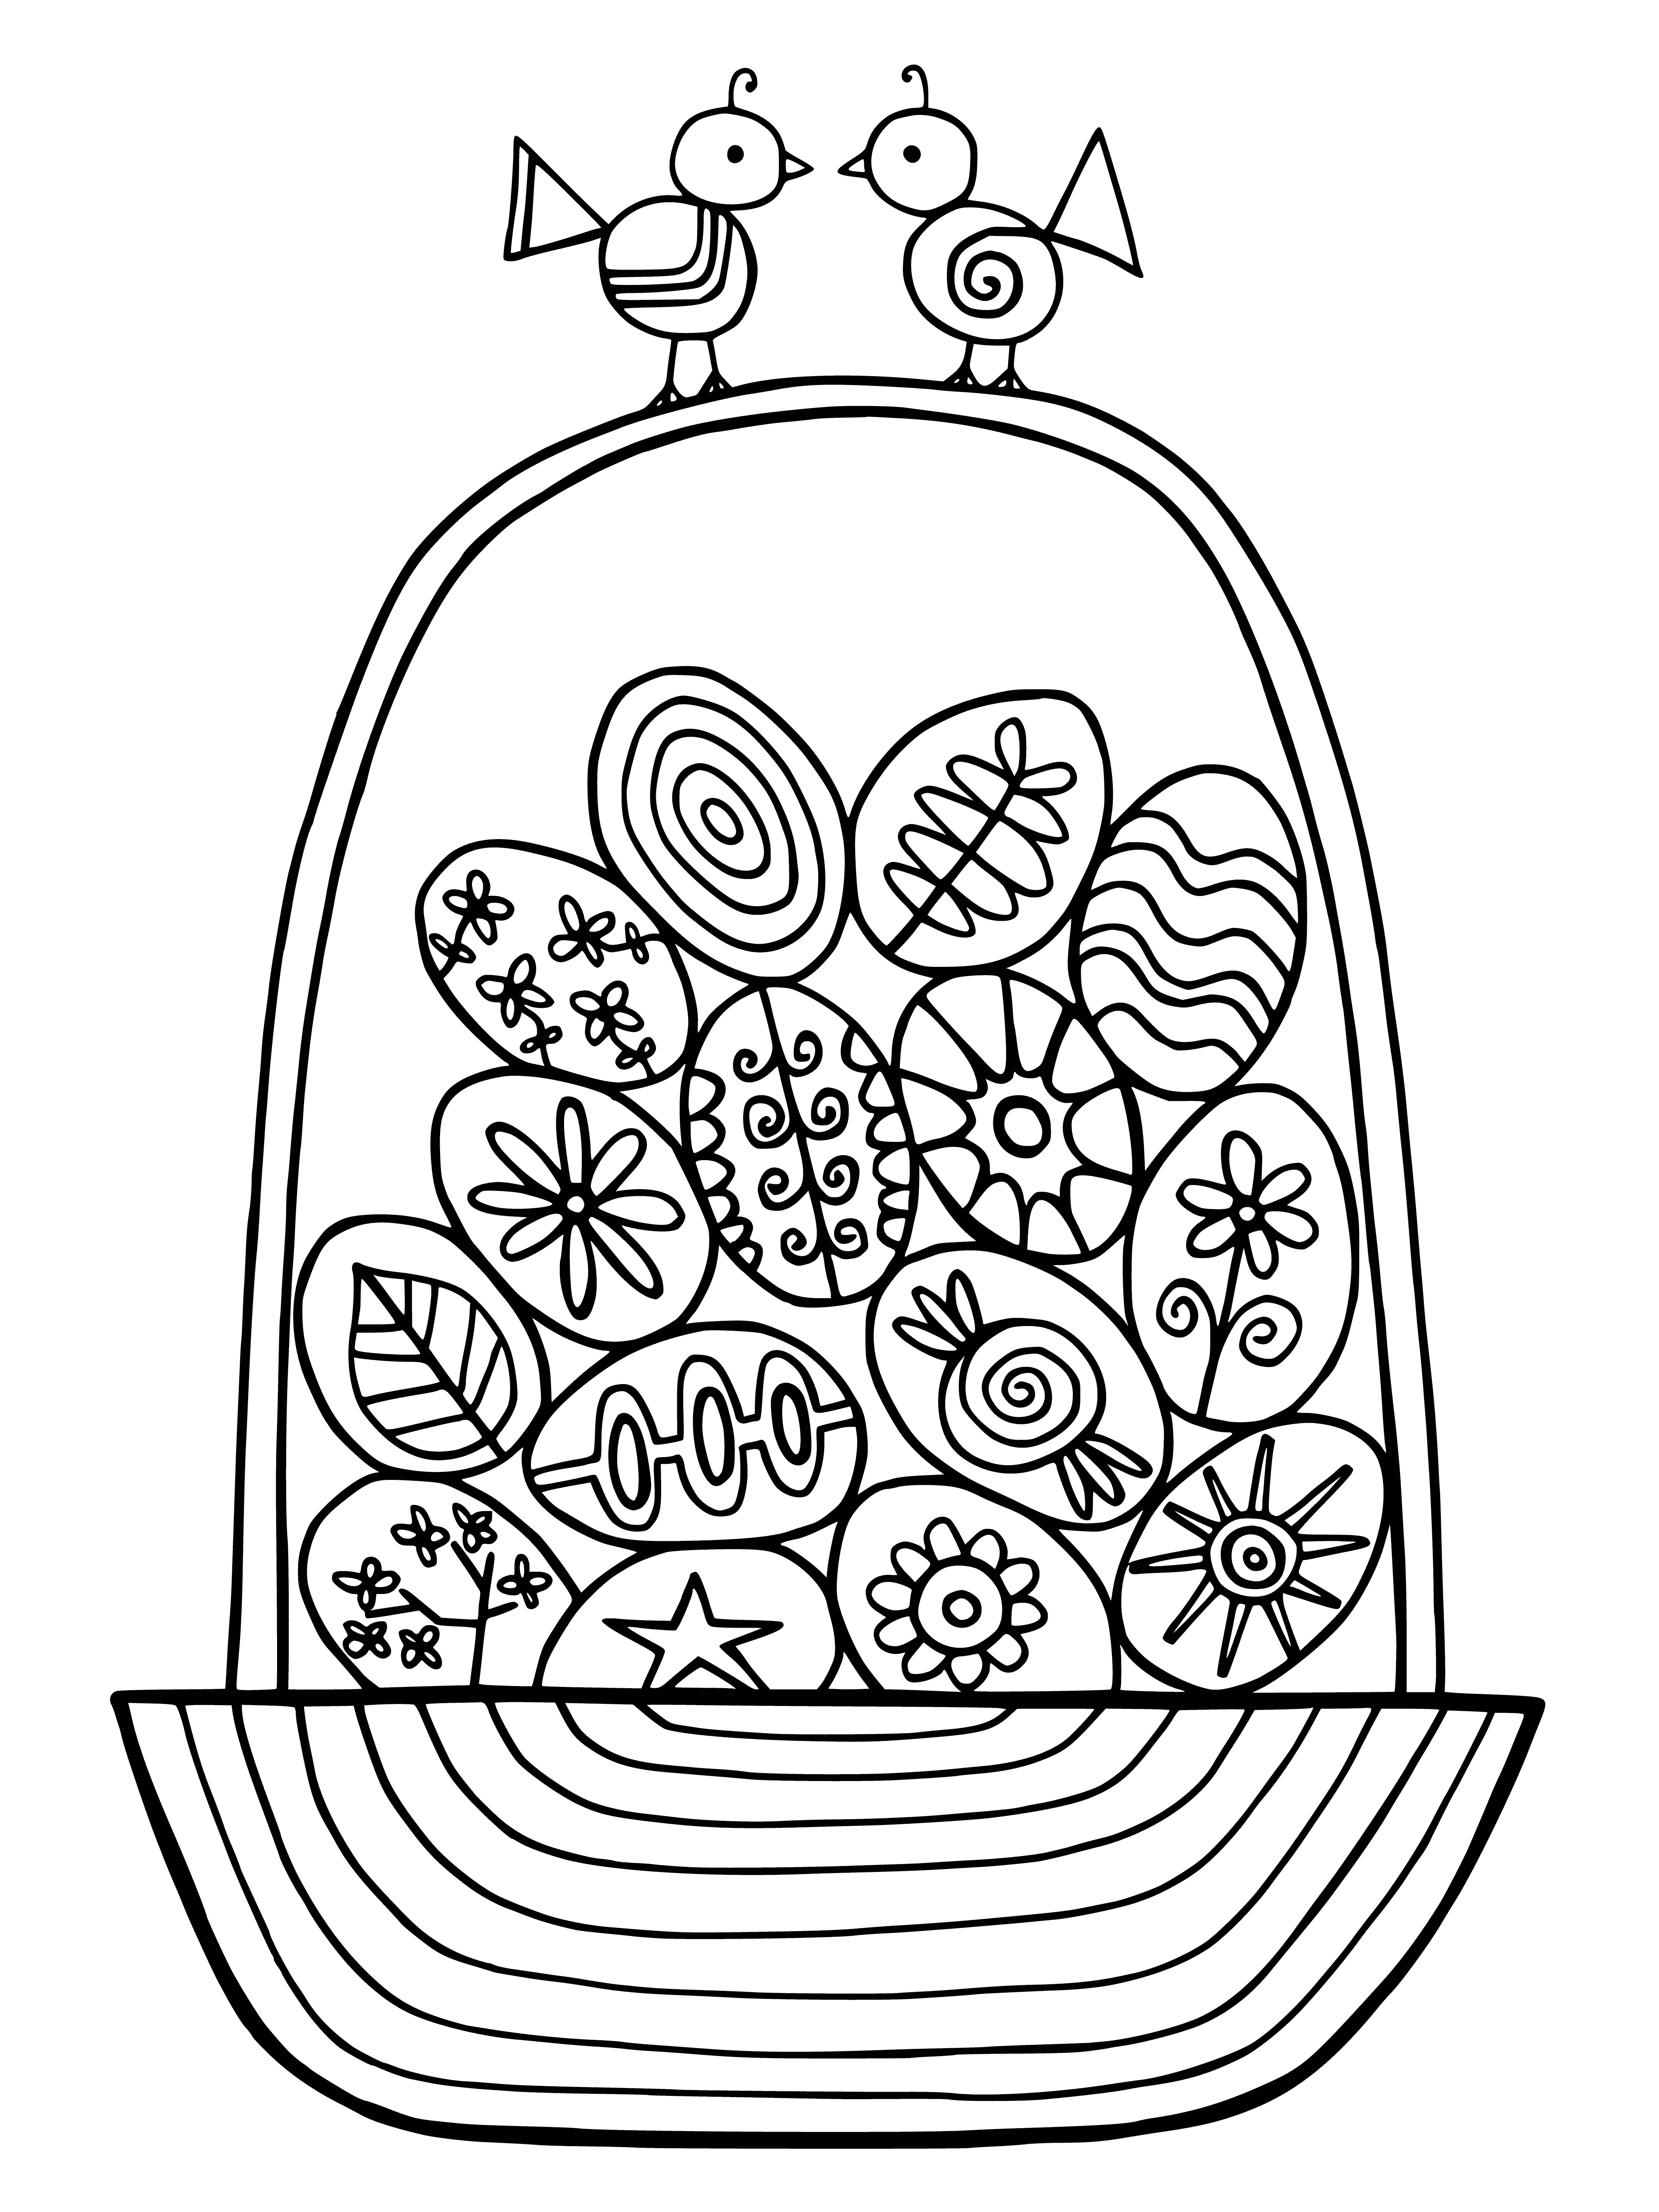 coloring page: Basket of eggs overflows with colorful eggs around large Easter egg in the center. #Easter